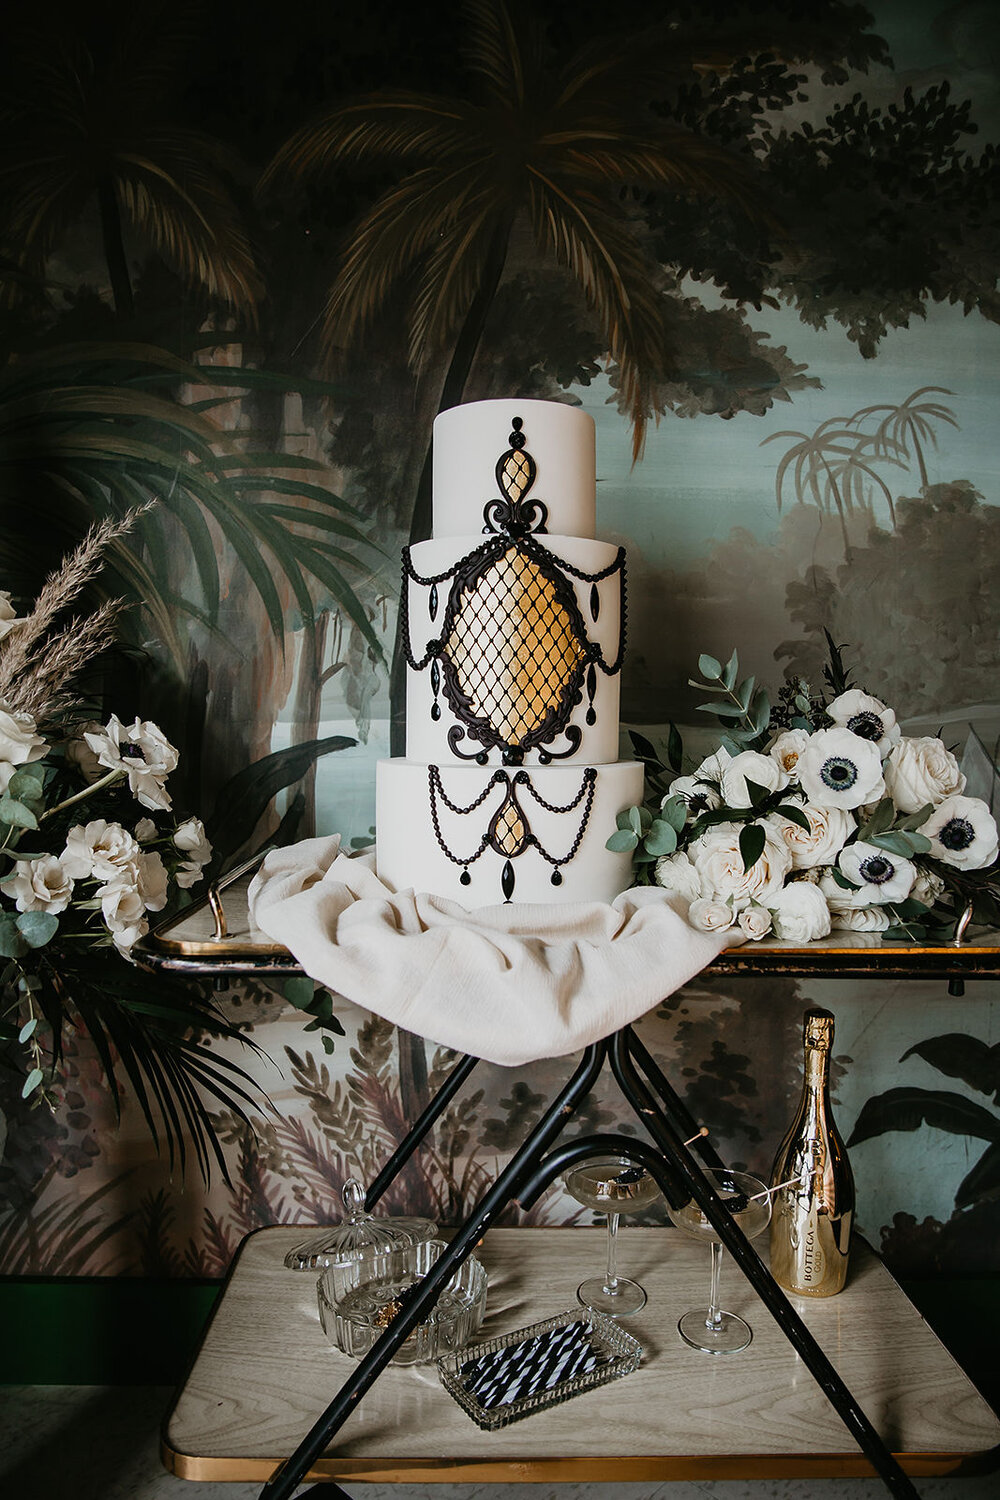 How to Plan a Themed Wedding Without Going Over the Top - vintage unique cake inspiration, gold and black wedding